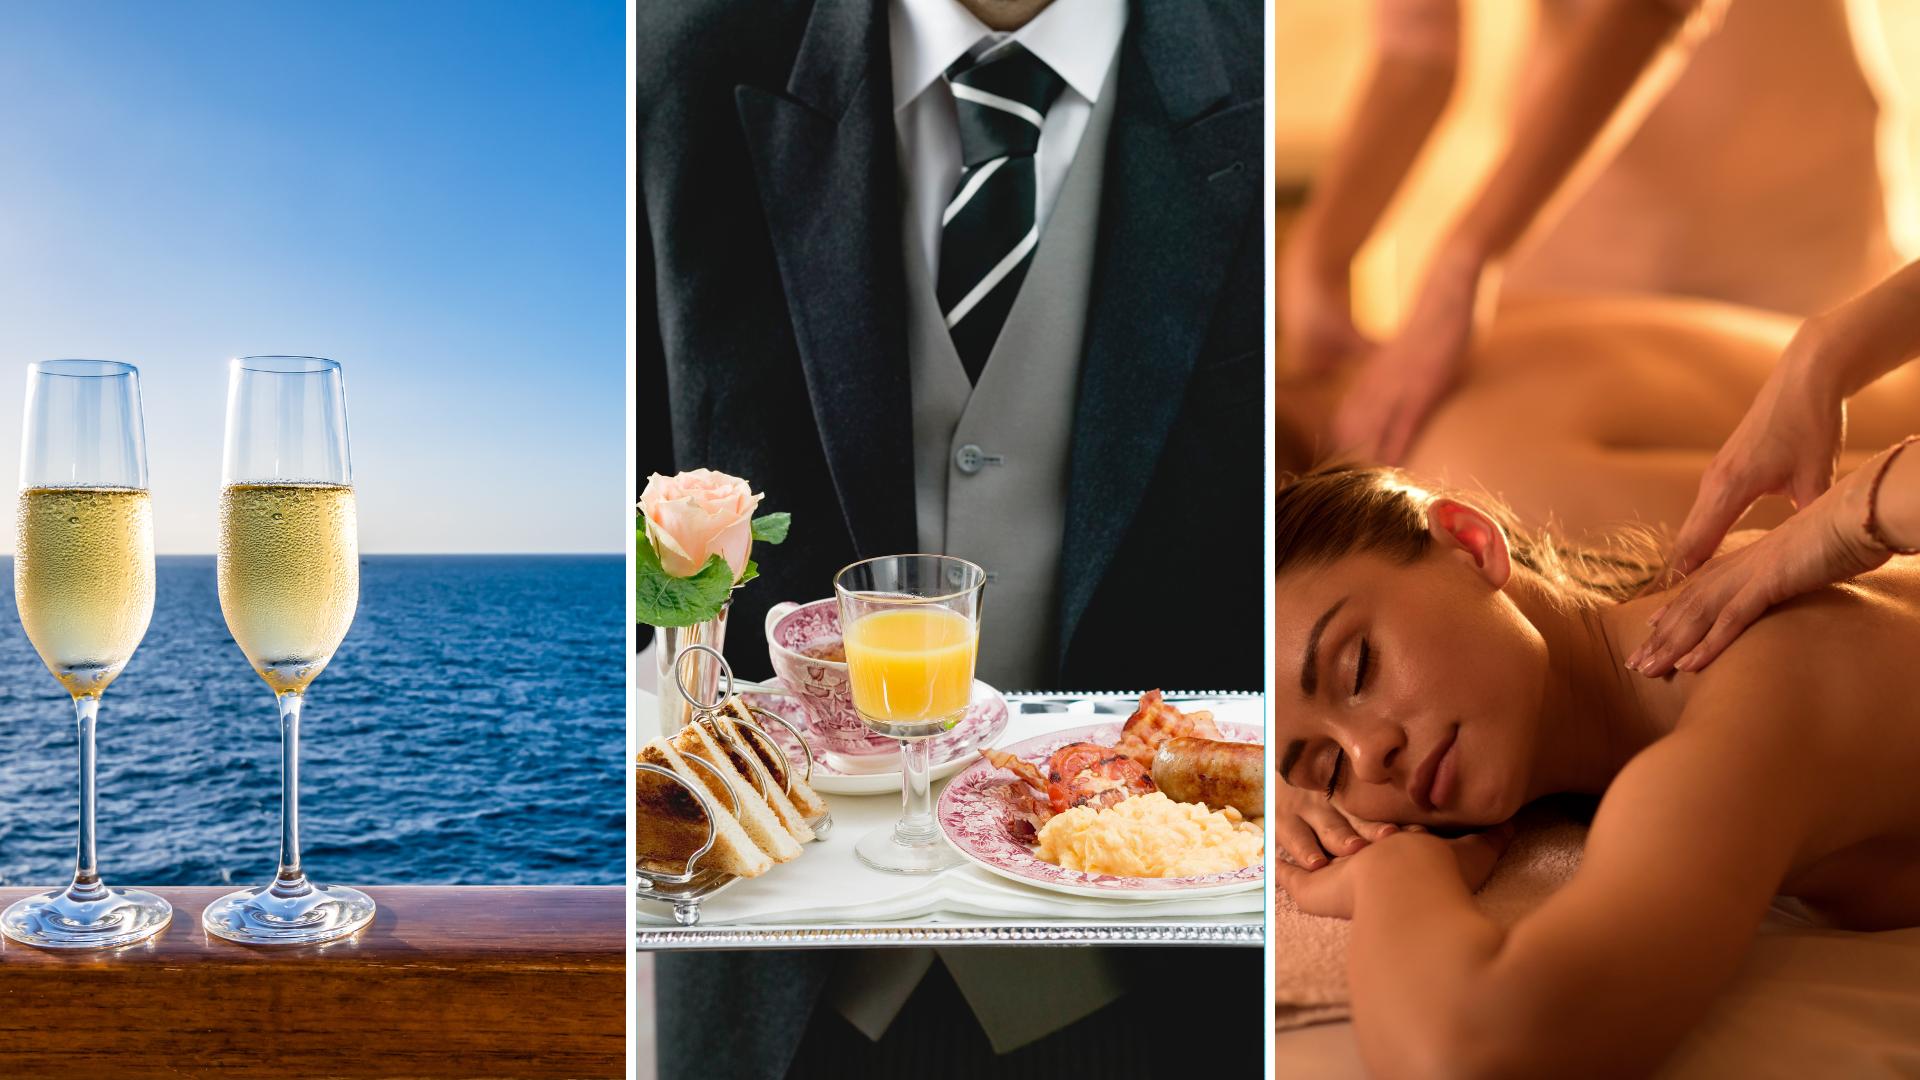 Examples of personalized services on luxury cruises.